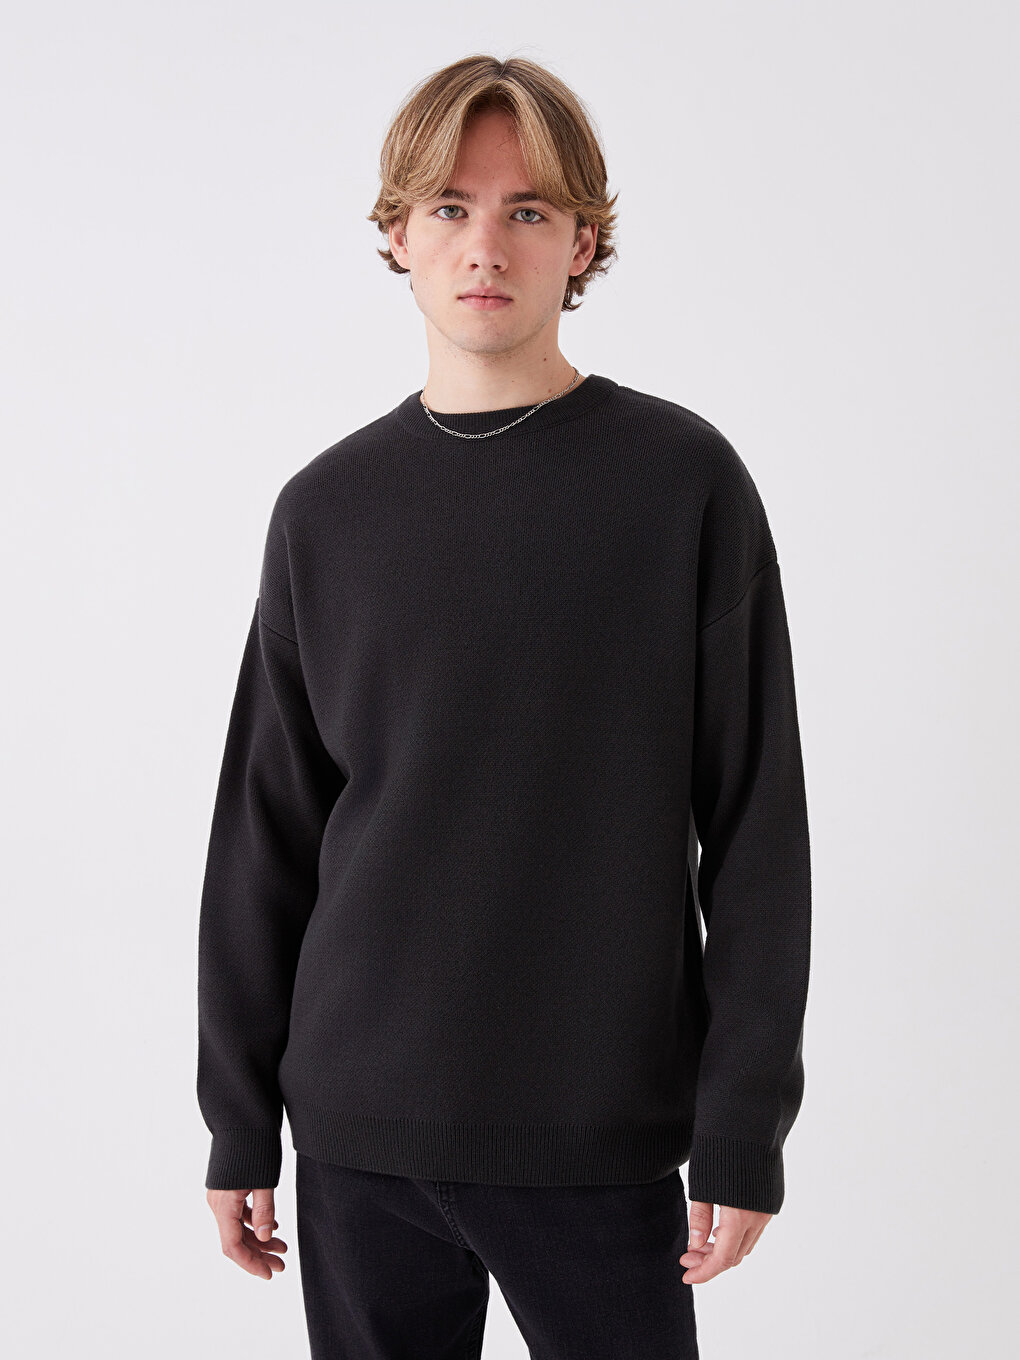 Crew Neck Long Sleeve Men's Tricot Sweater -W3CP76Z8-VY6 - W3CP76Z8-VY6 ...